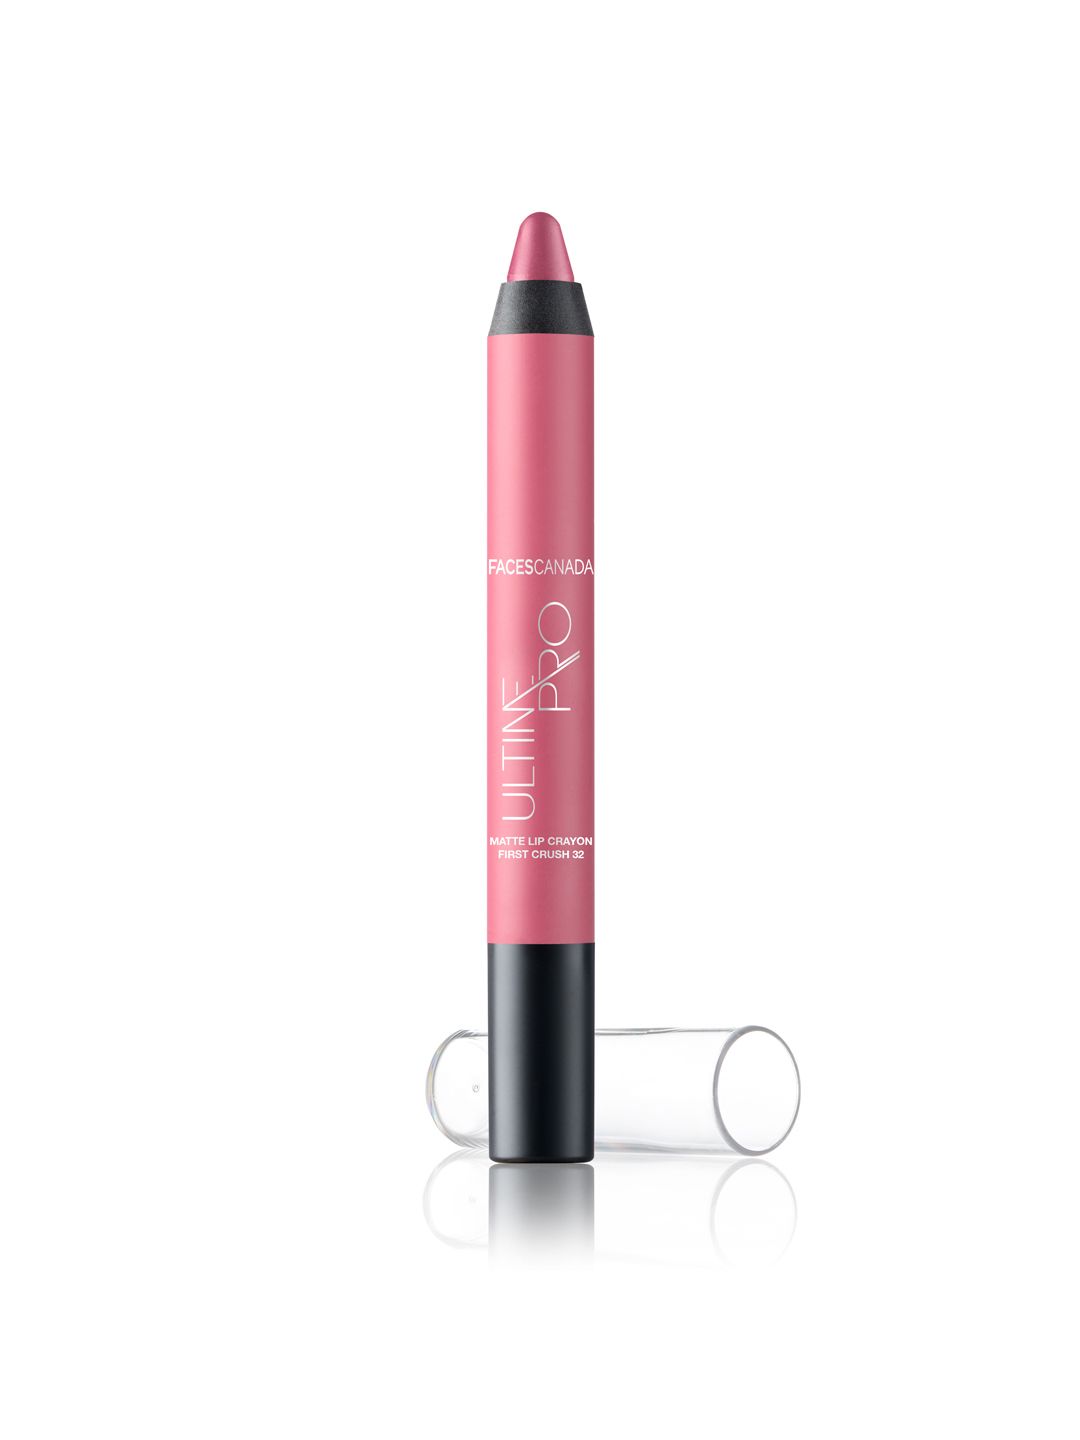 FACES CANADA First Crush 32 Ultime Pro Matte Lip Crayon 2.8g Price in India